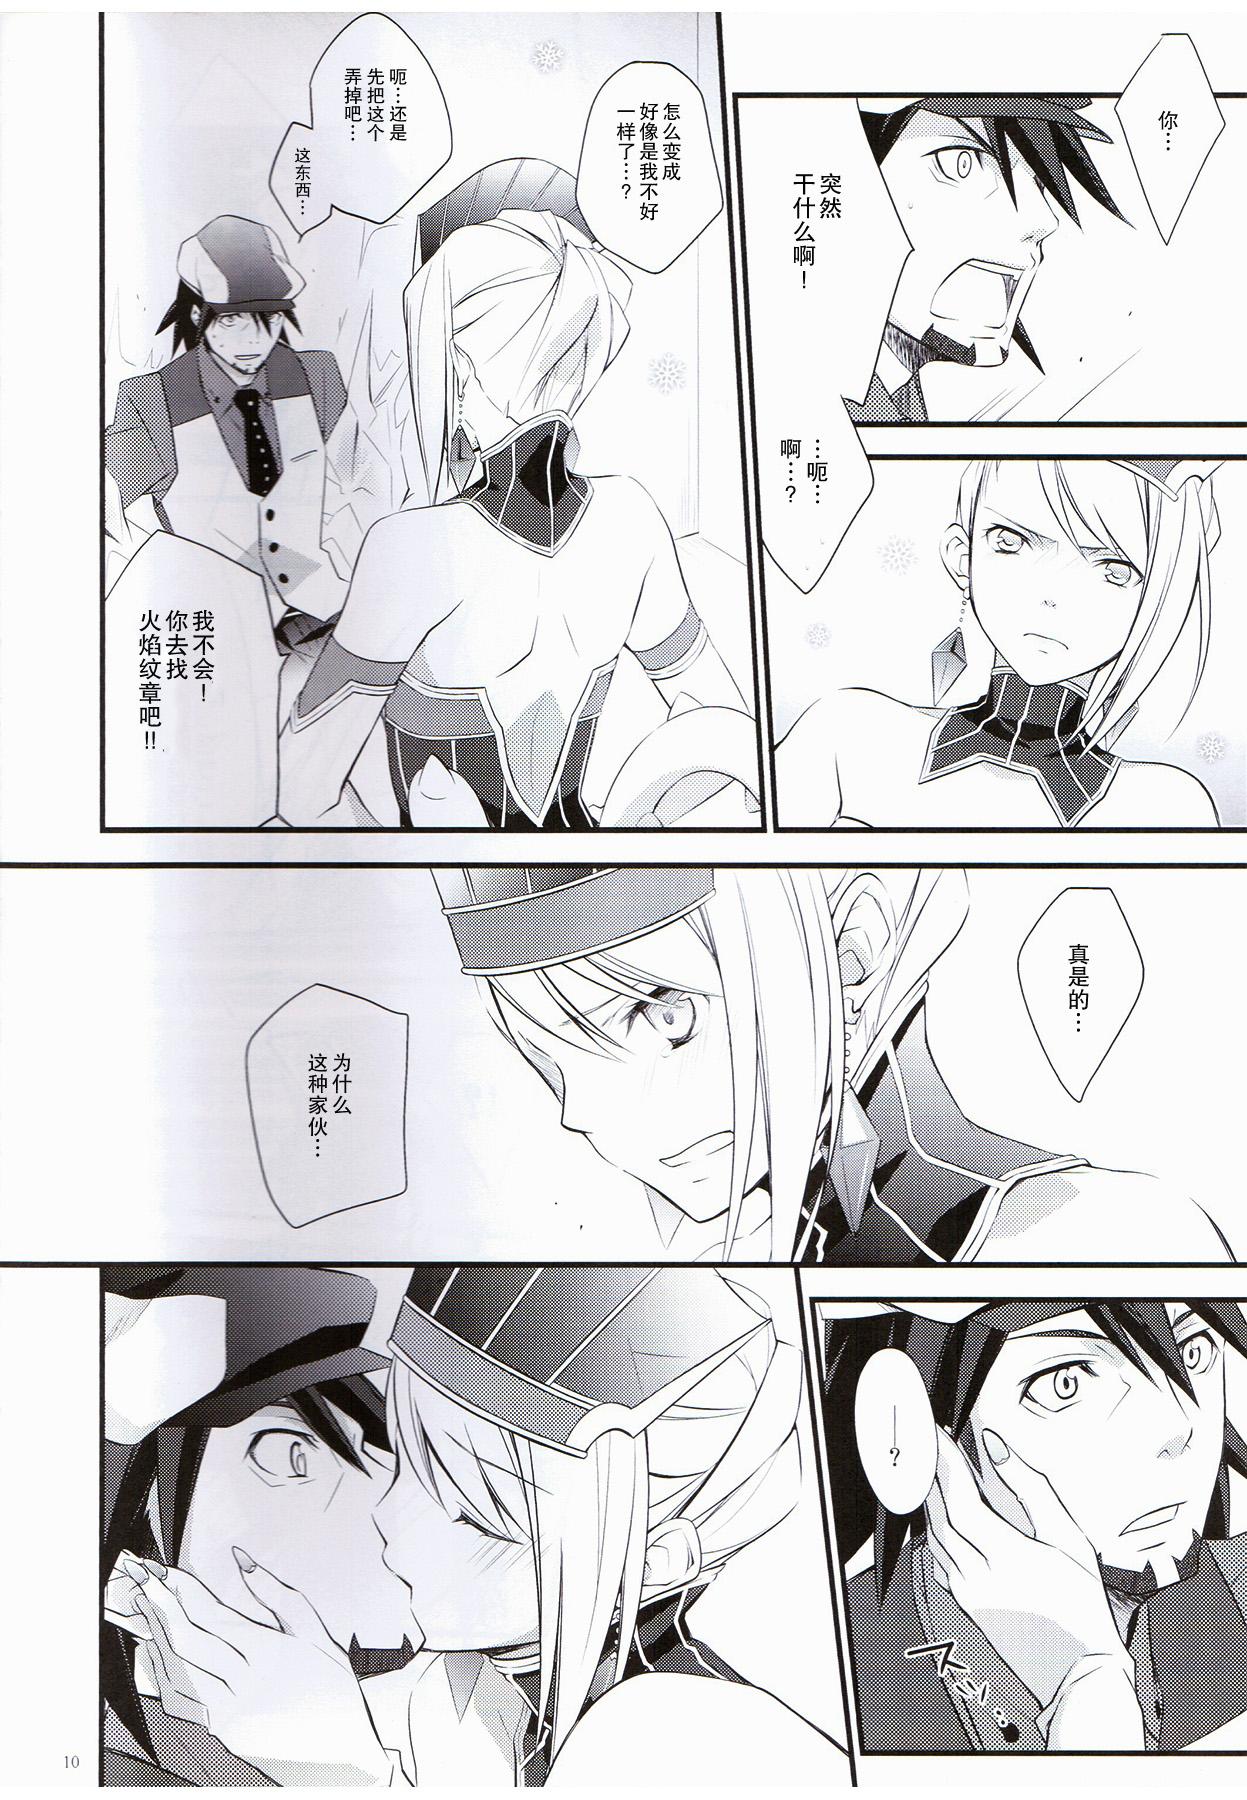 Banging Absolute Zero - Tiger and bunny Insane Porn - Page 9